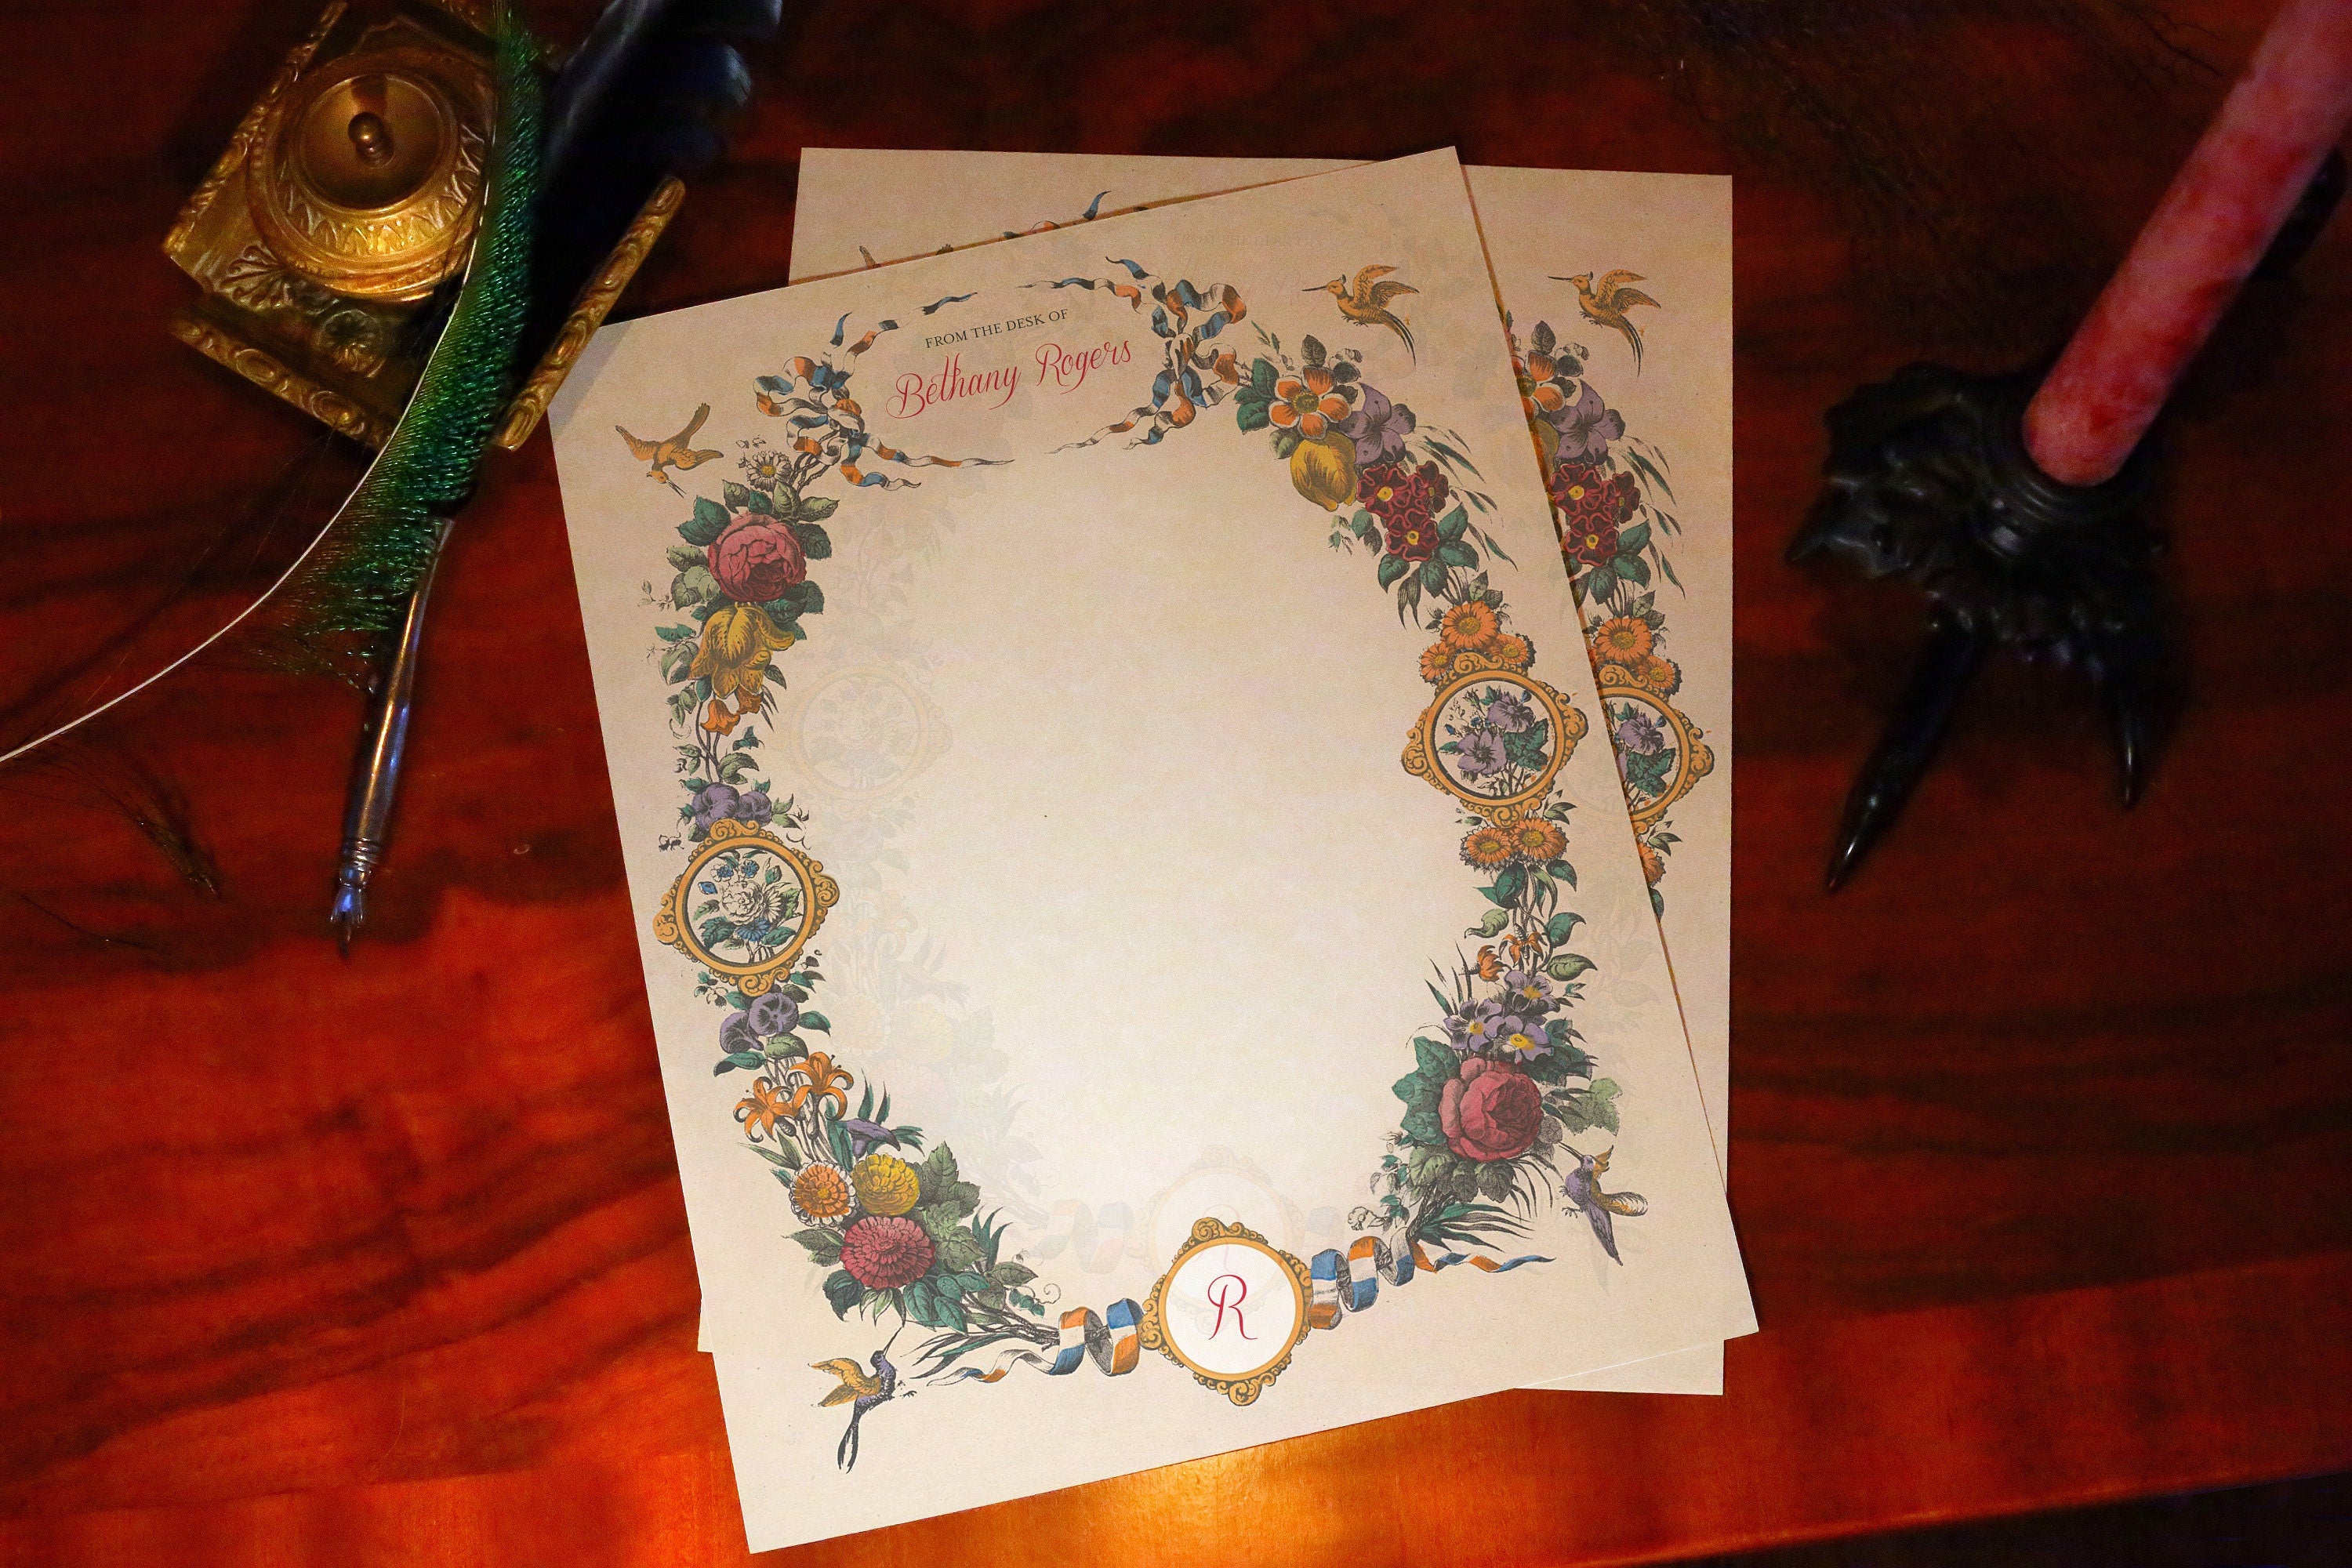 Hummingbird Rhapsody, Luxurious Handcrafted Stationery Set for Letter Writing, Personalized, 12 Sheets/10 Envelopes